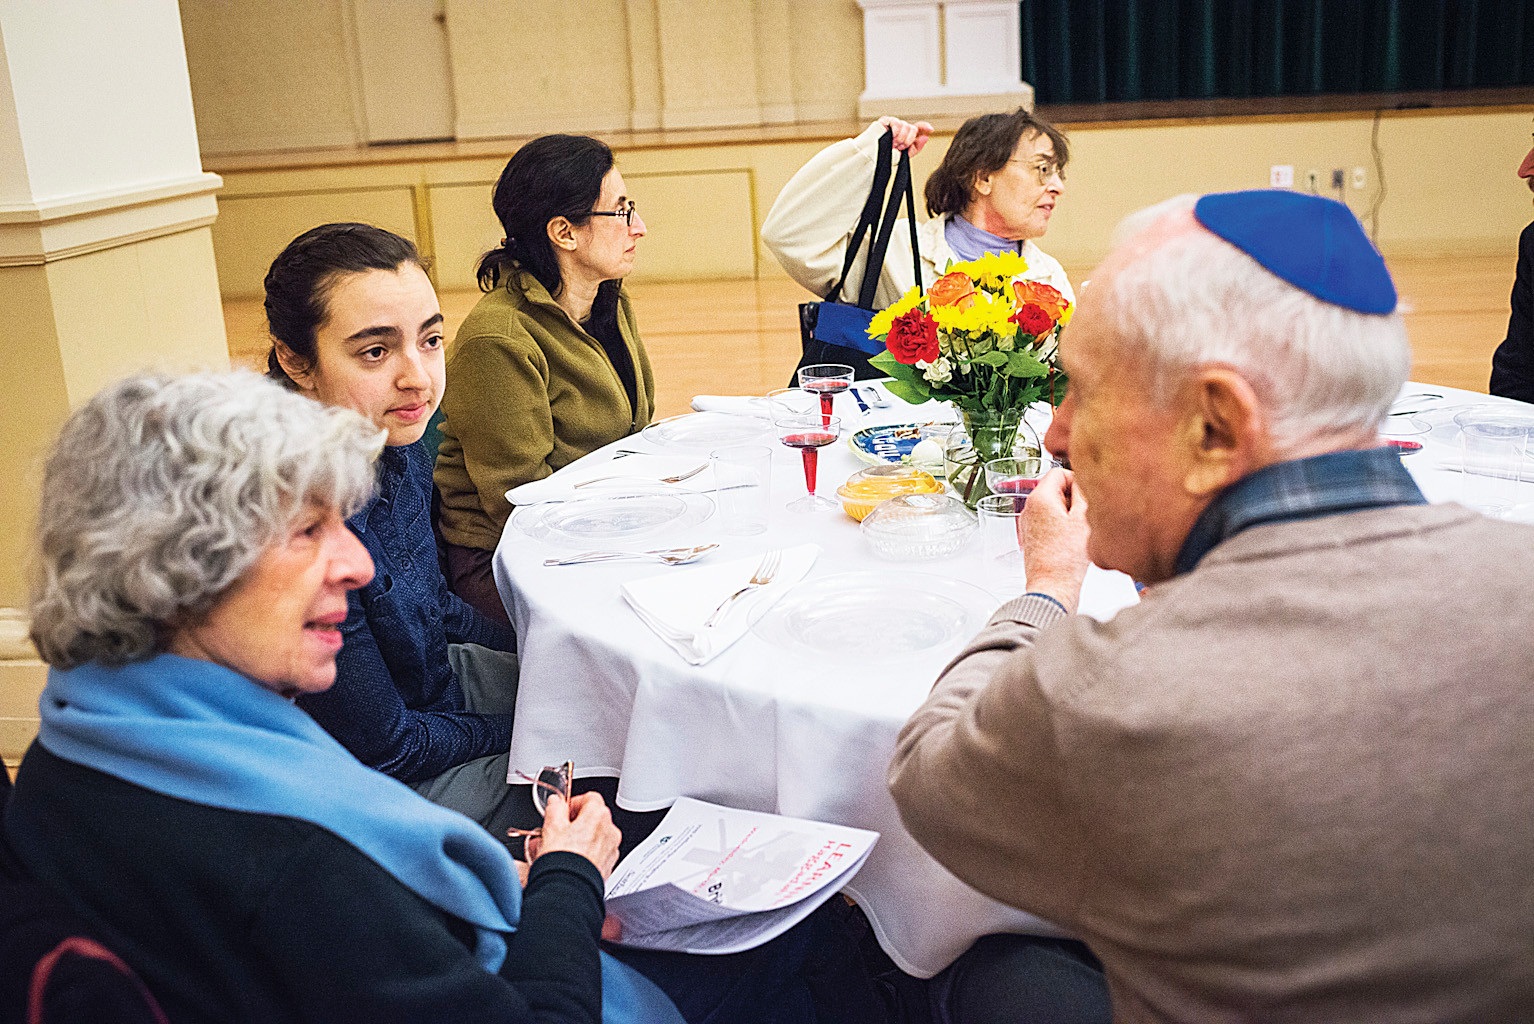 Seder attendees trade stories while at the Manhattan College celebration.